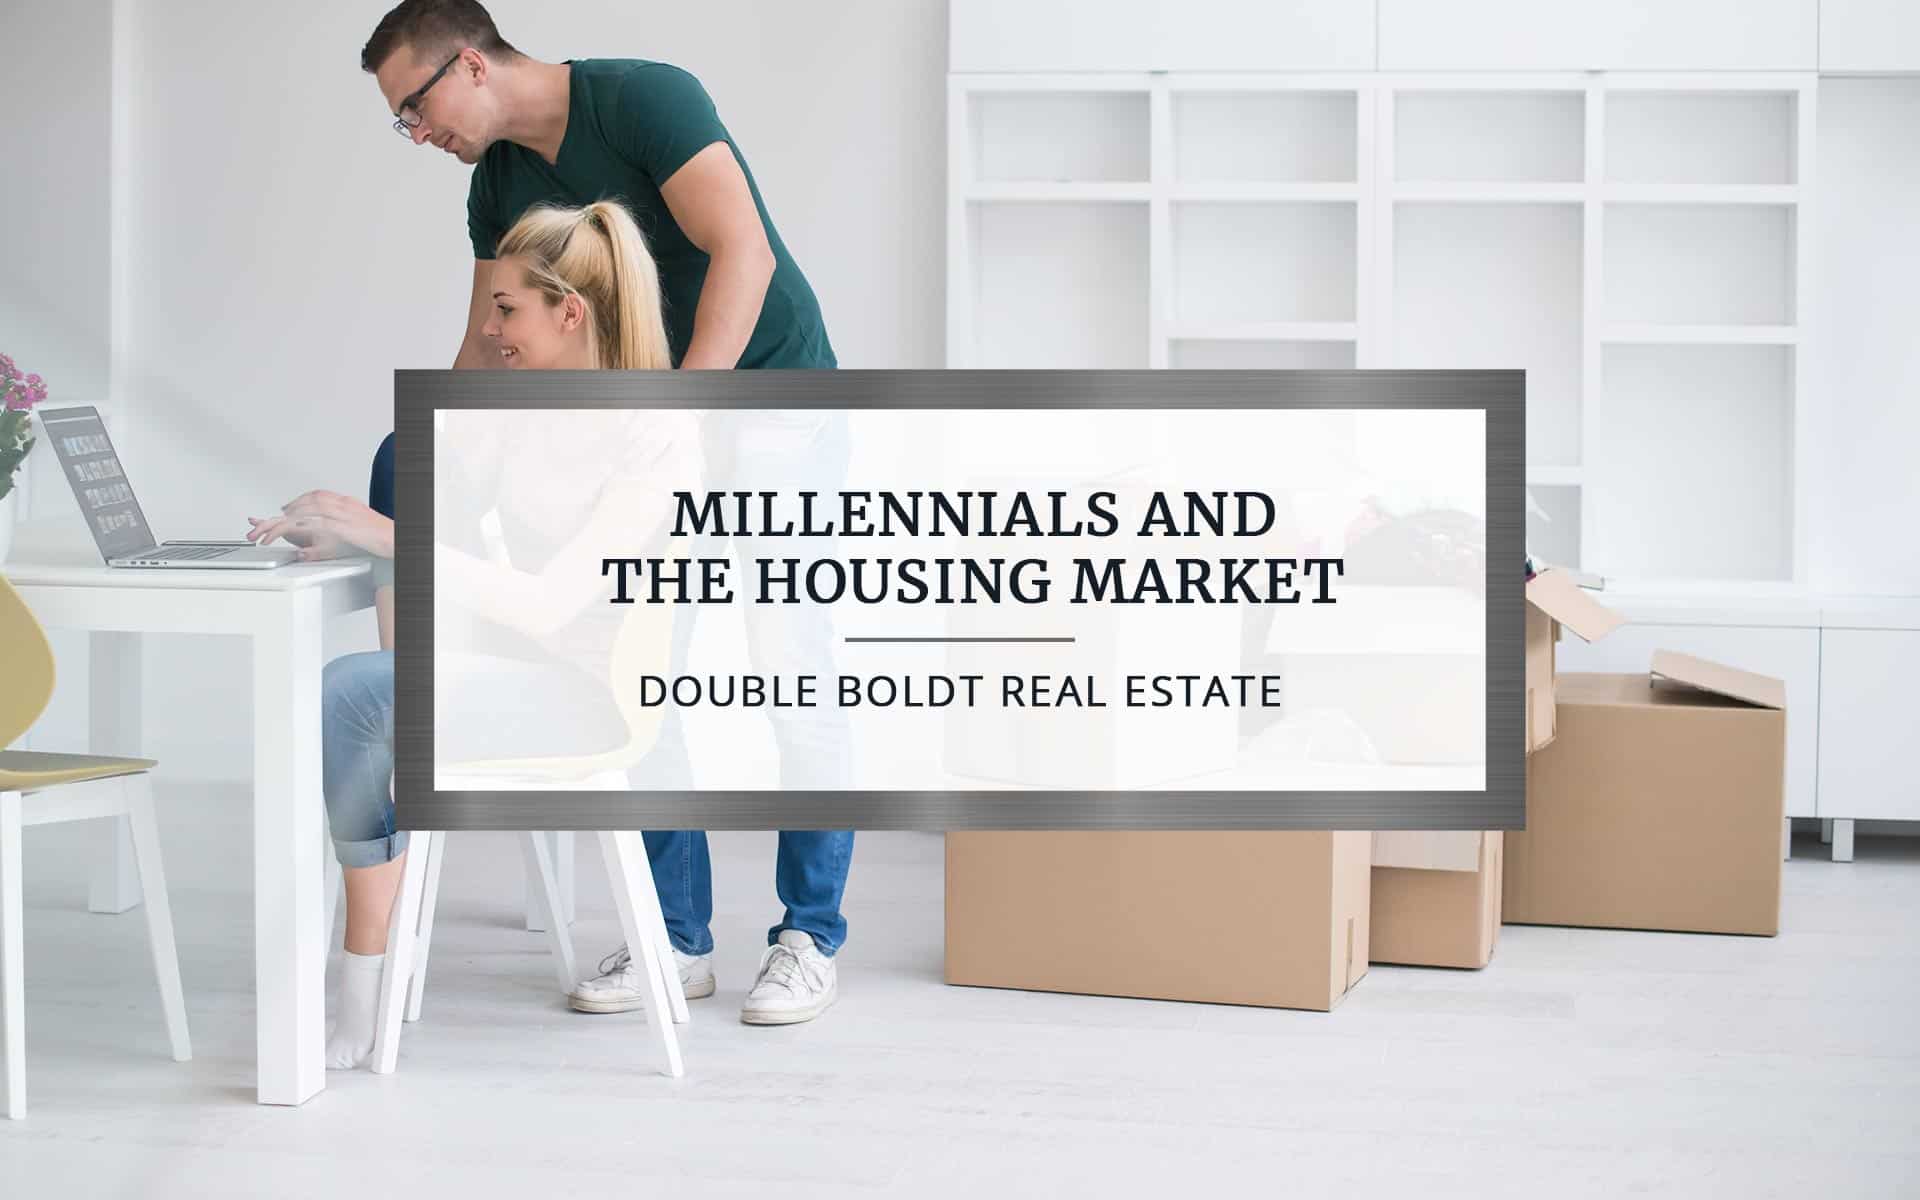 How are millenials changing the real estate industry